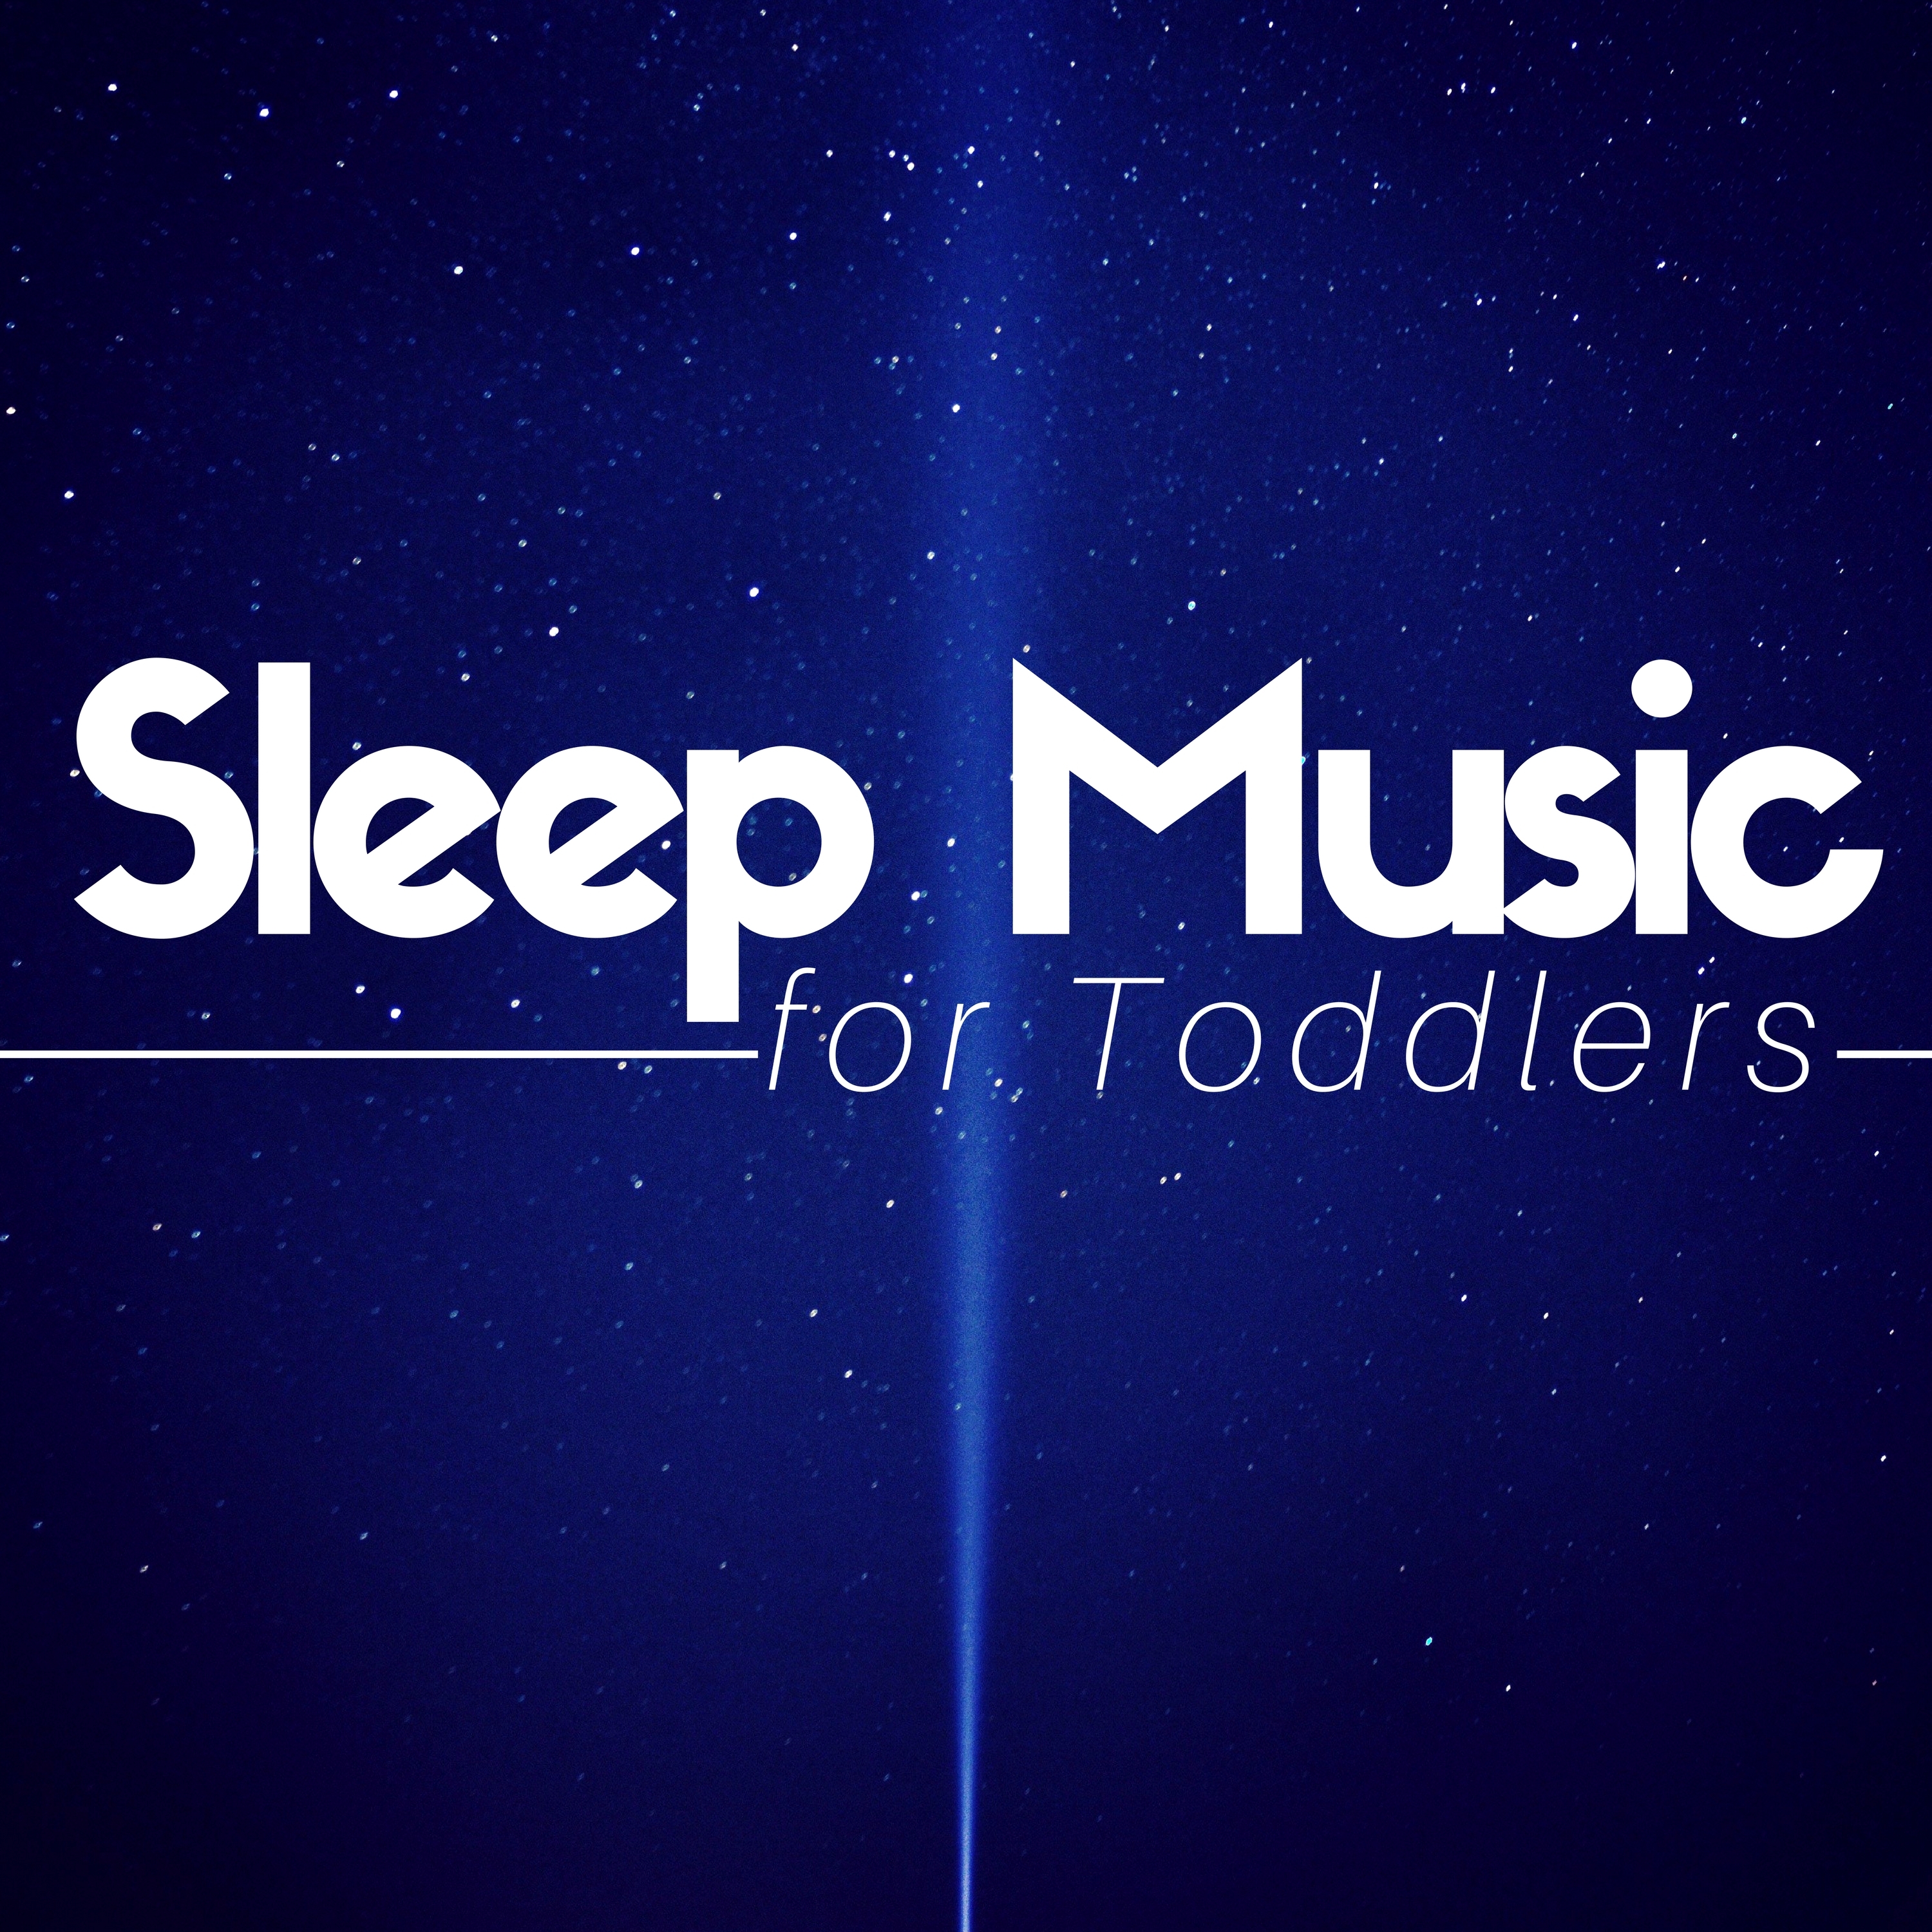 Sleep Music for Toddlers